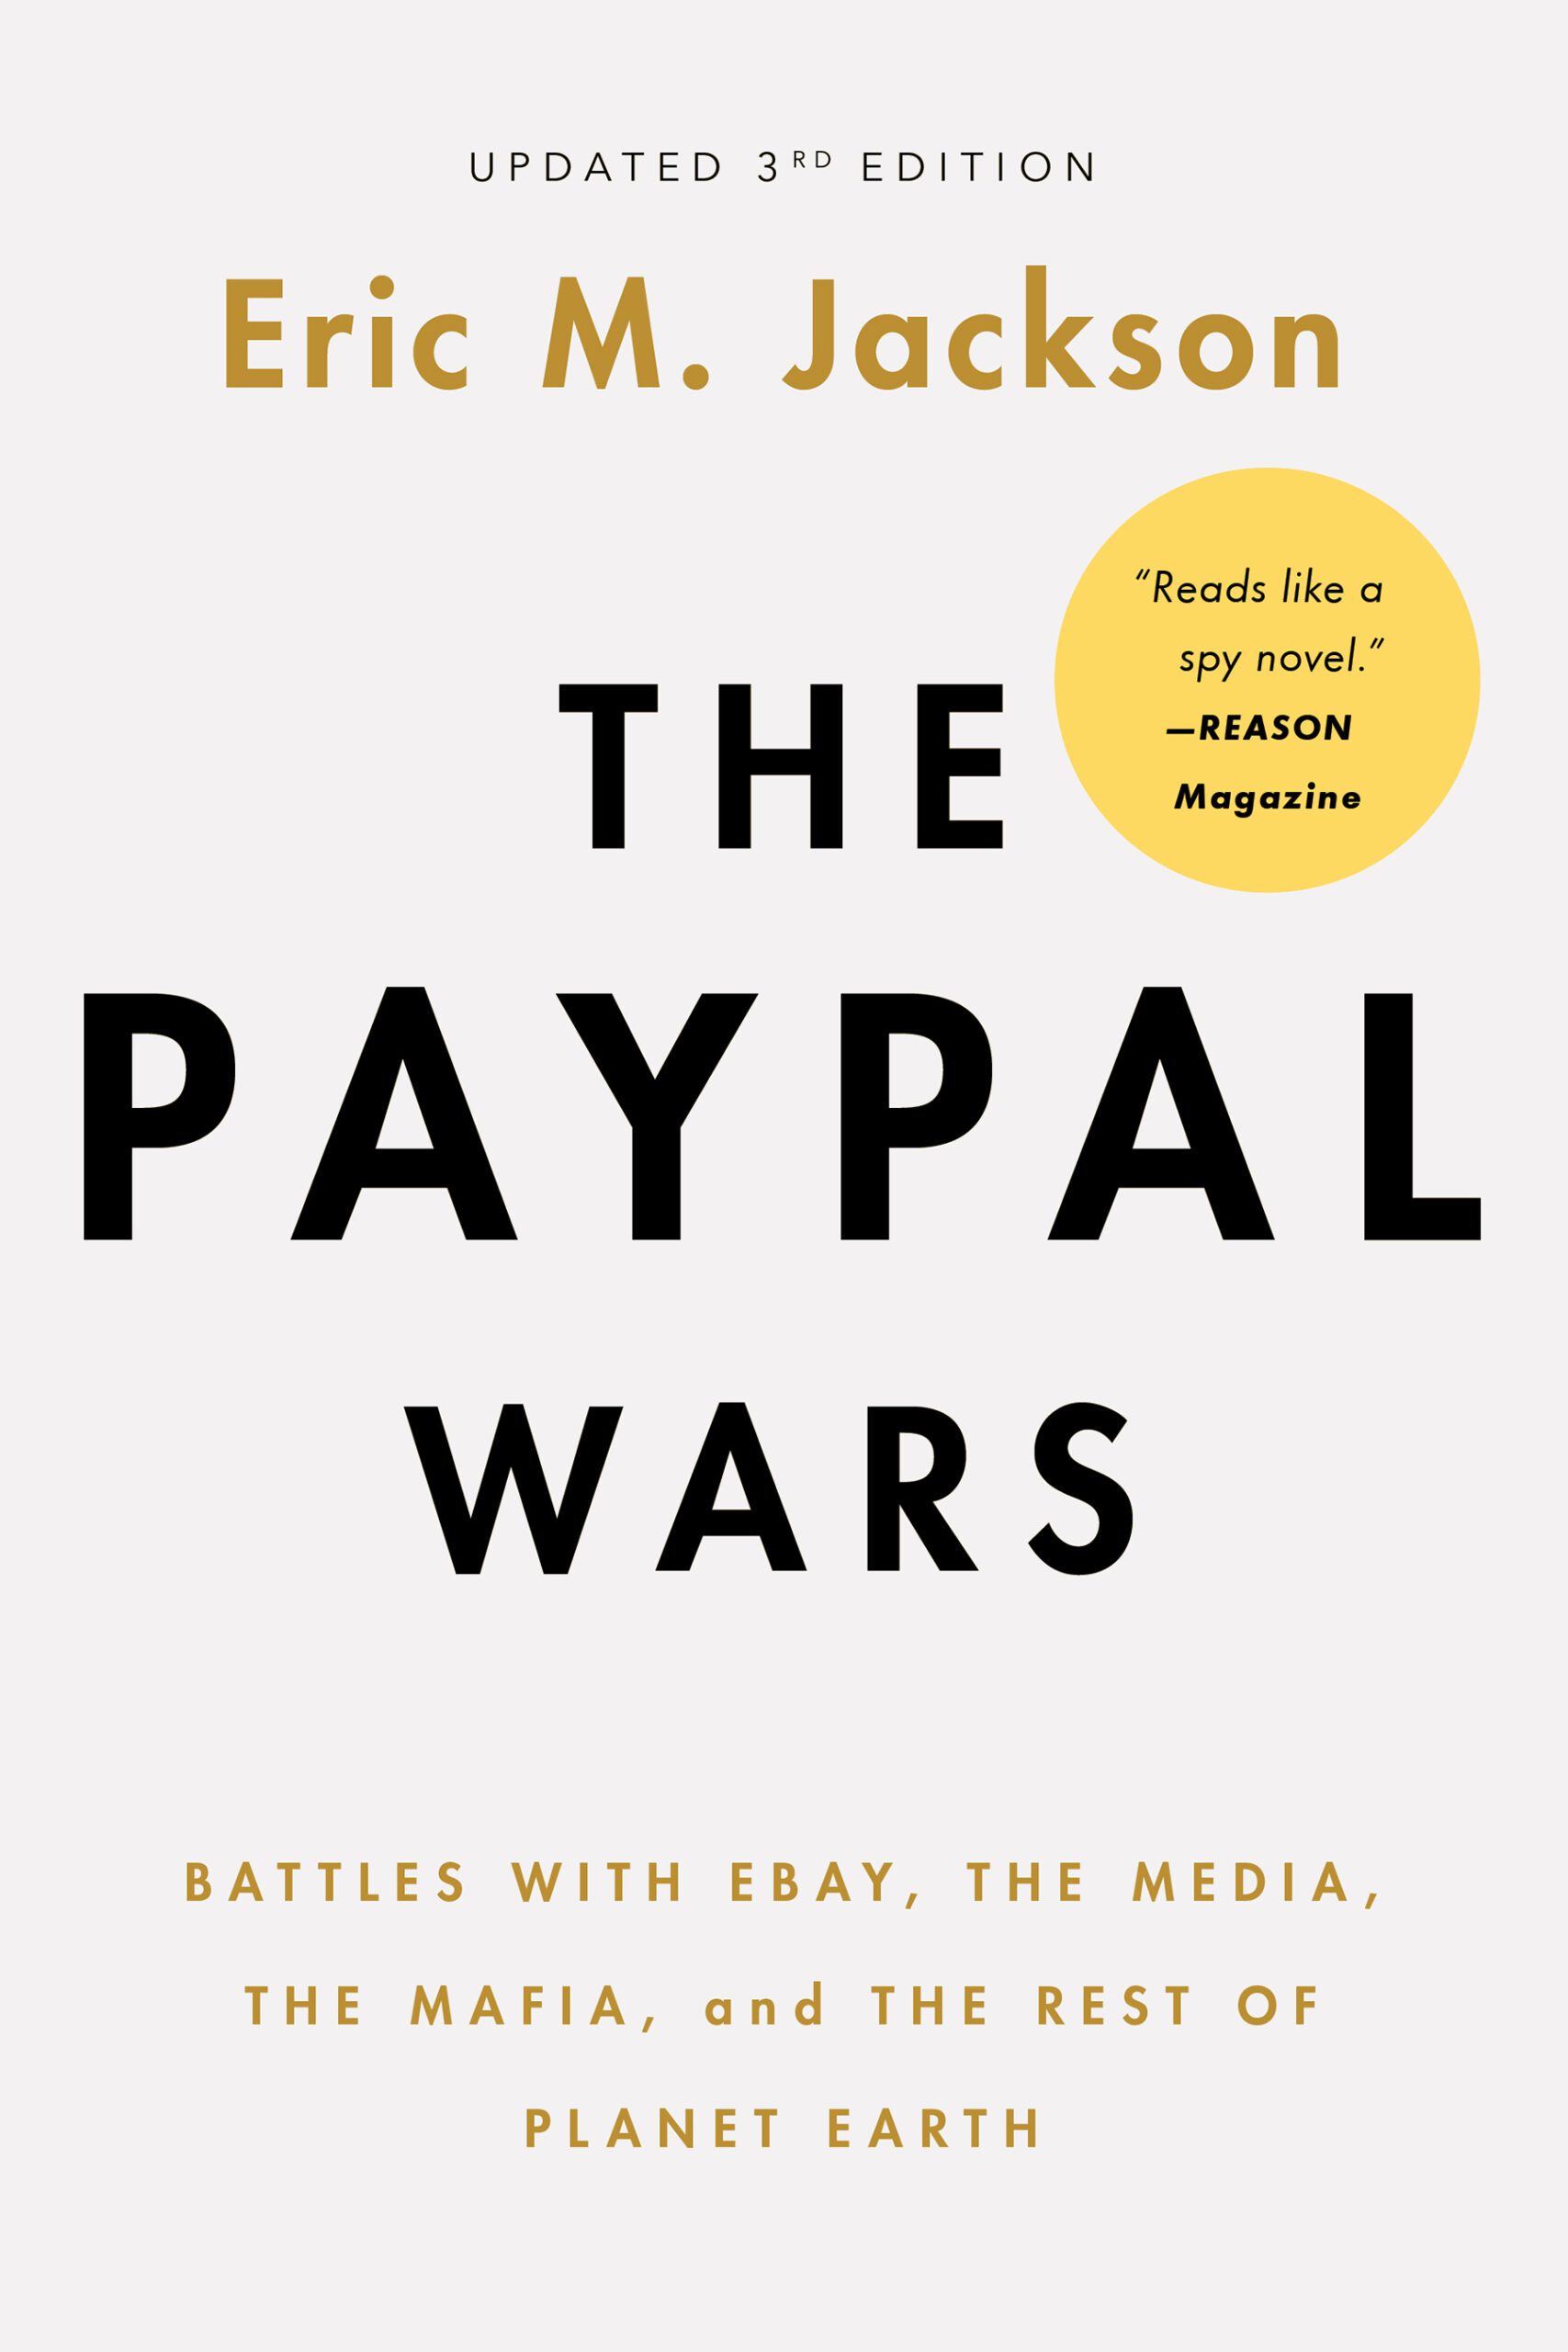 The Paypal Wars by Eric M. Jackson